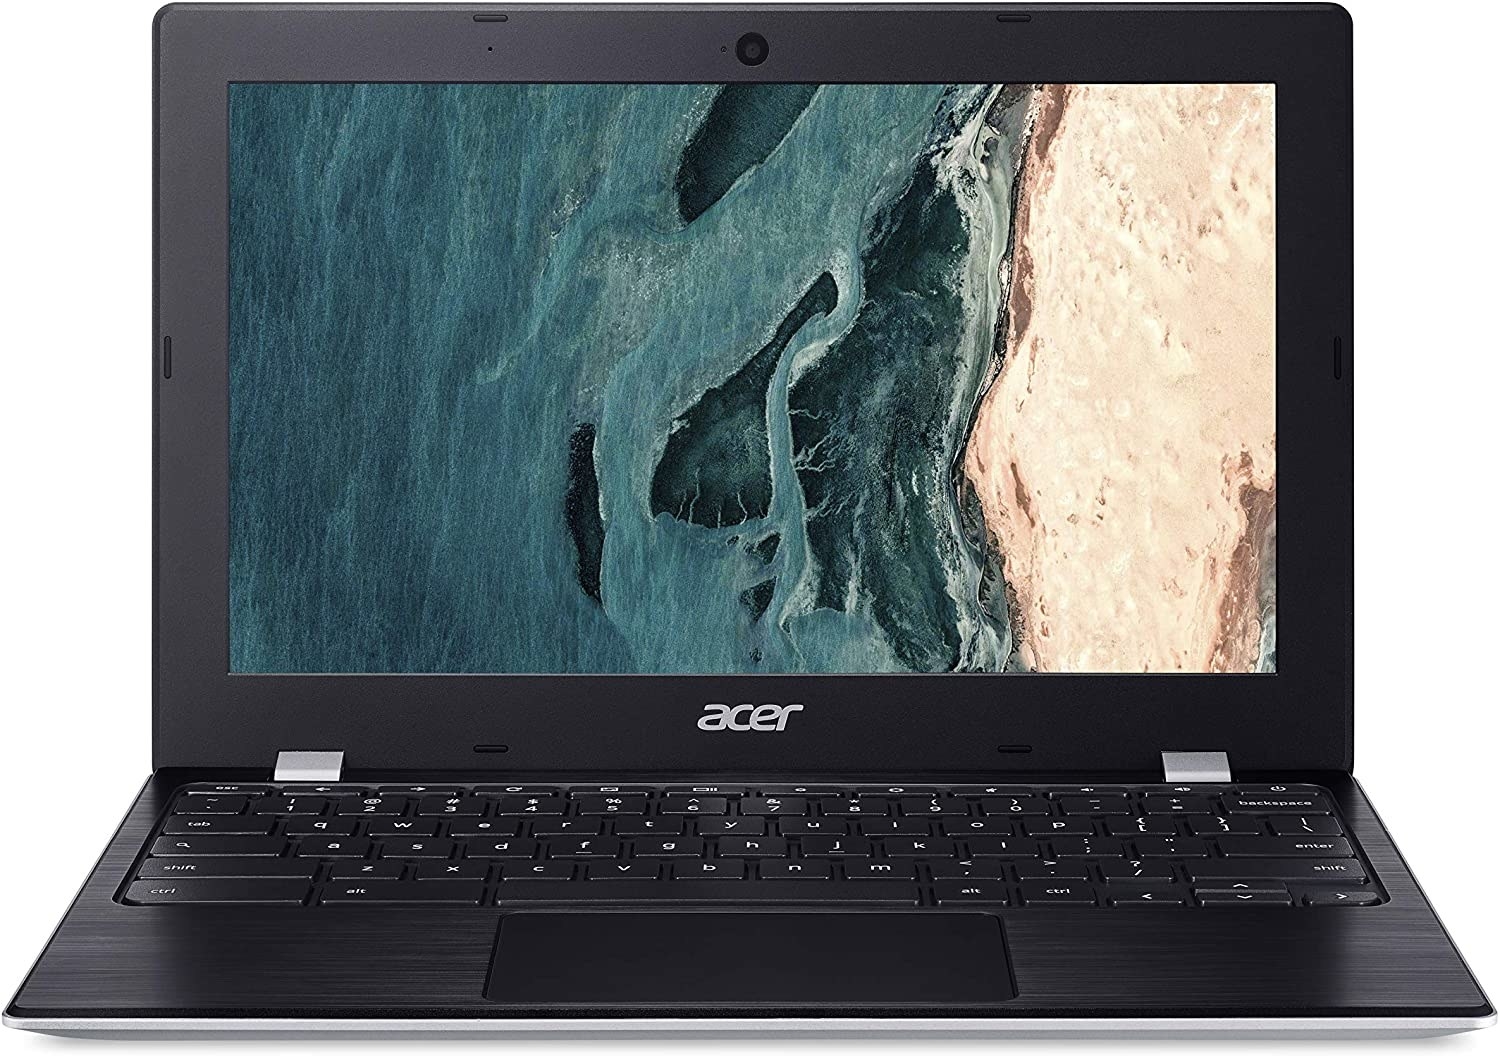 The Acer laptop on a blank background with a beachy screensaver